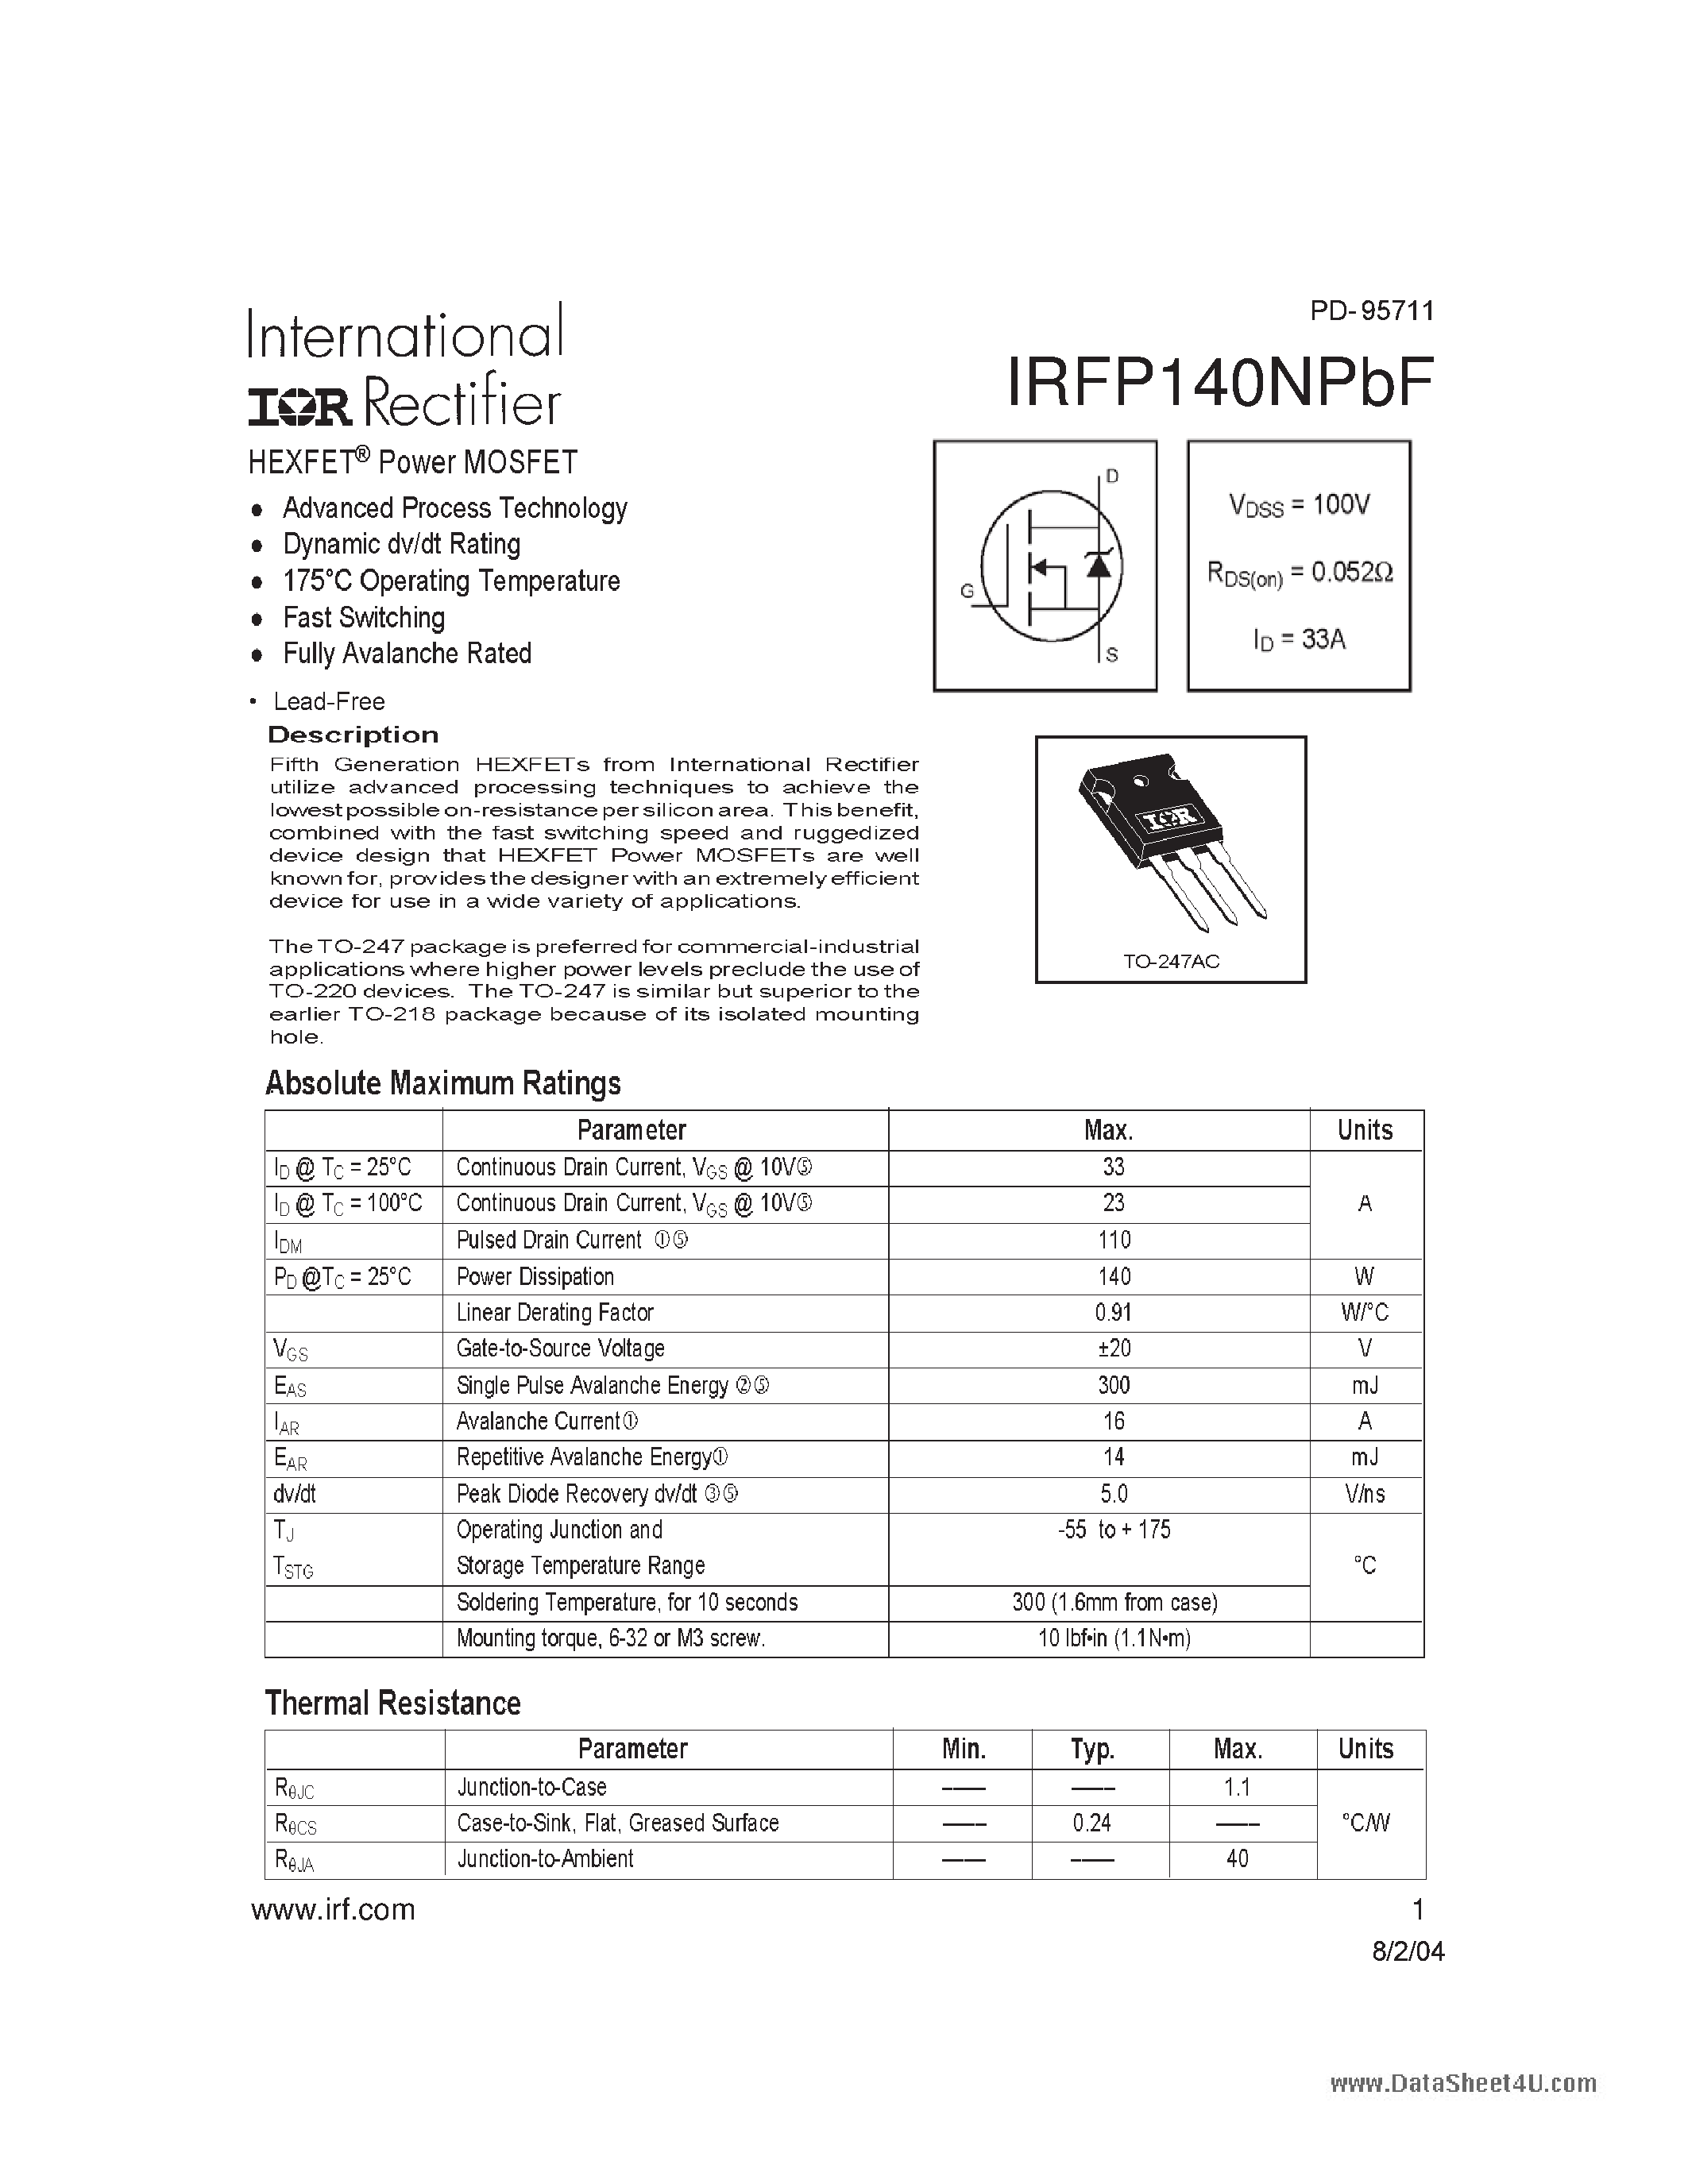 Datasheet IRFP140NPBF - HEXFET Power MOSFET page 1